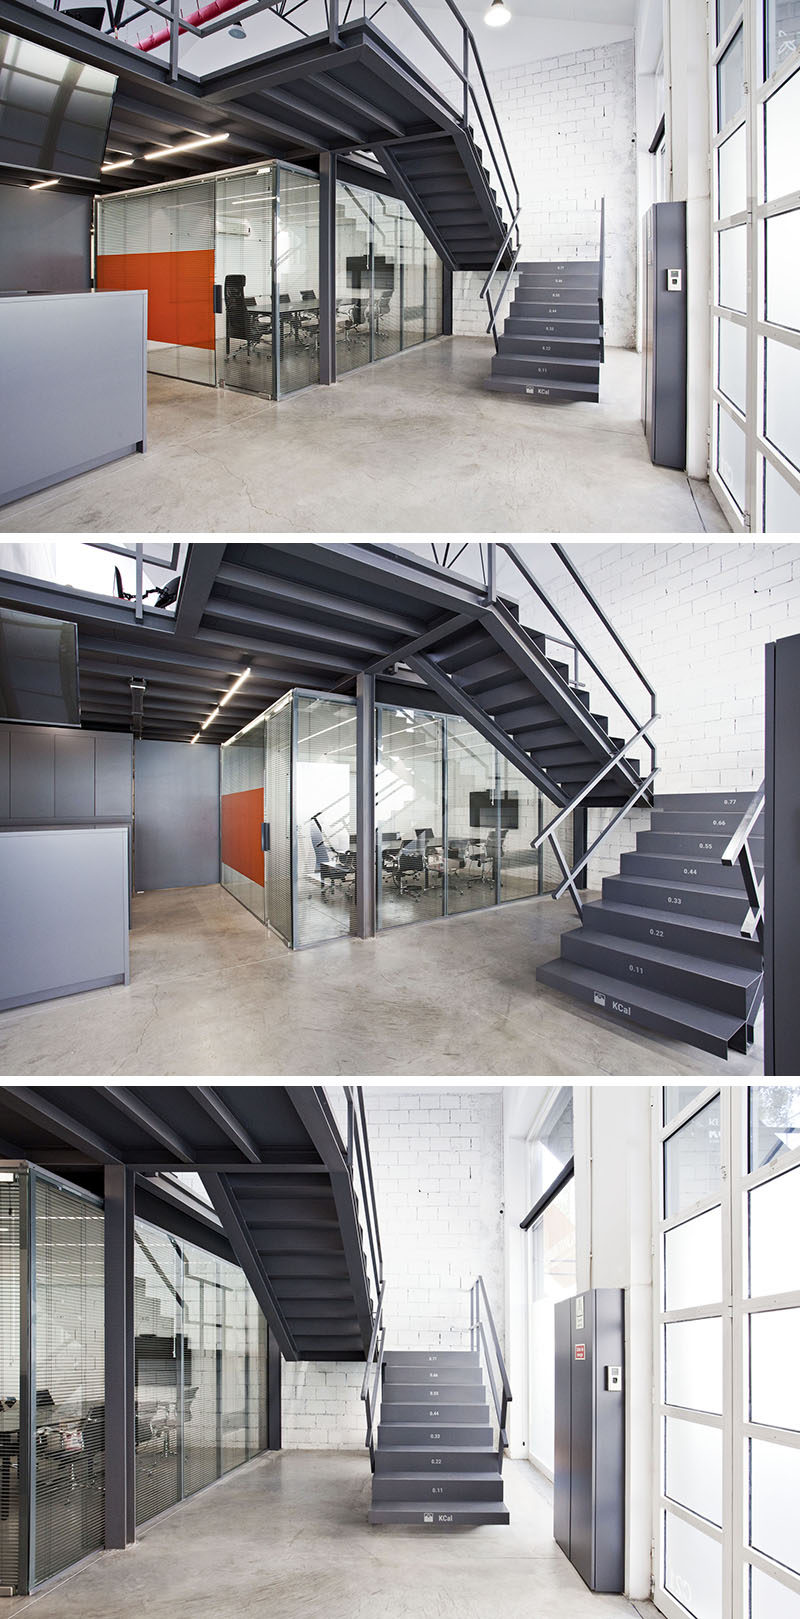 Stairs Design Ideas - These office stairs have the number of calories you burn on each tread as you walk up them.